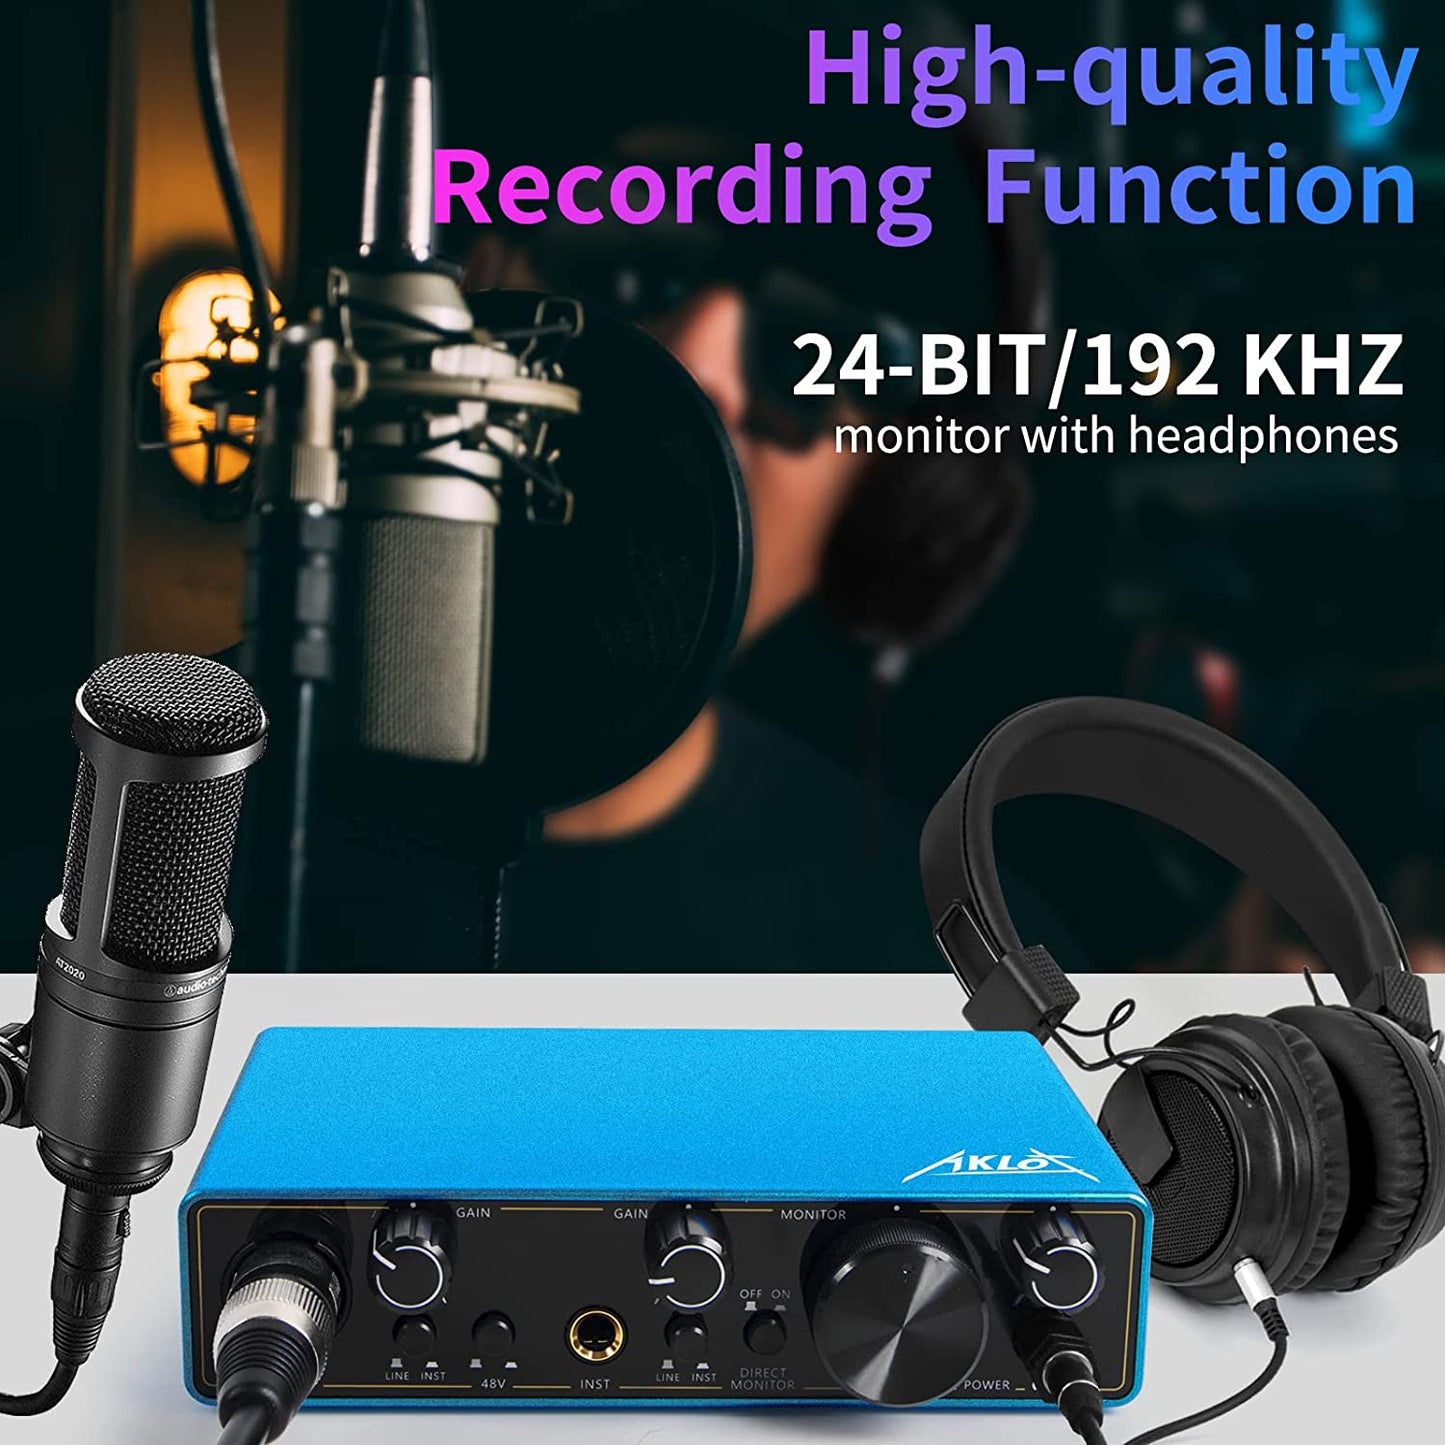 High-Fidelity USB Audio Interface with XRL Inputs, Ideal for Musicians, Podcasters, and Producers - Studio-Quality Recording with 24-Bit/192 kHz Resolution, Compatible with PC, Windows, and Mac